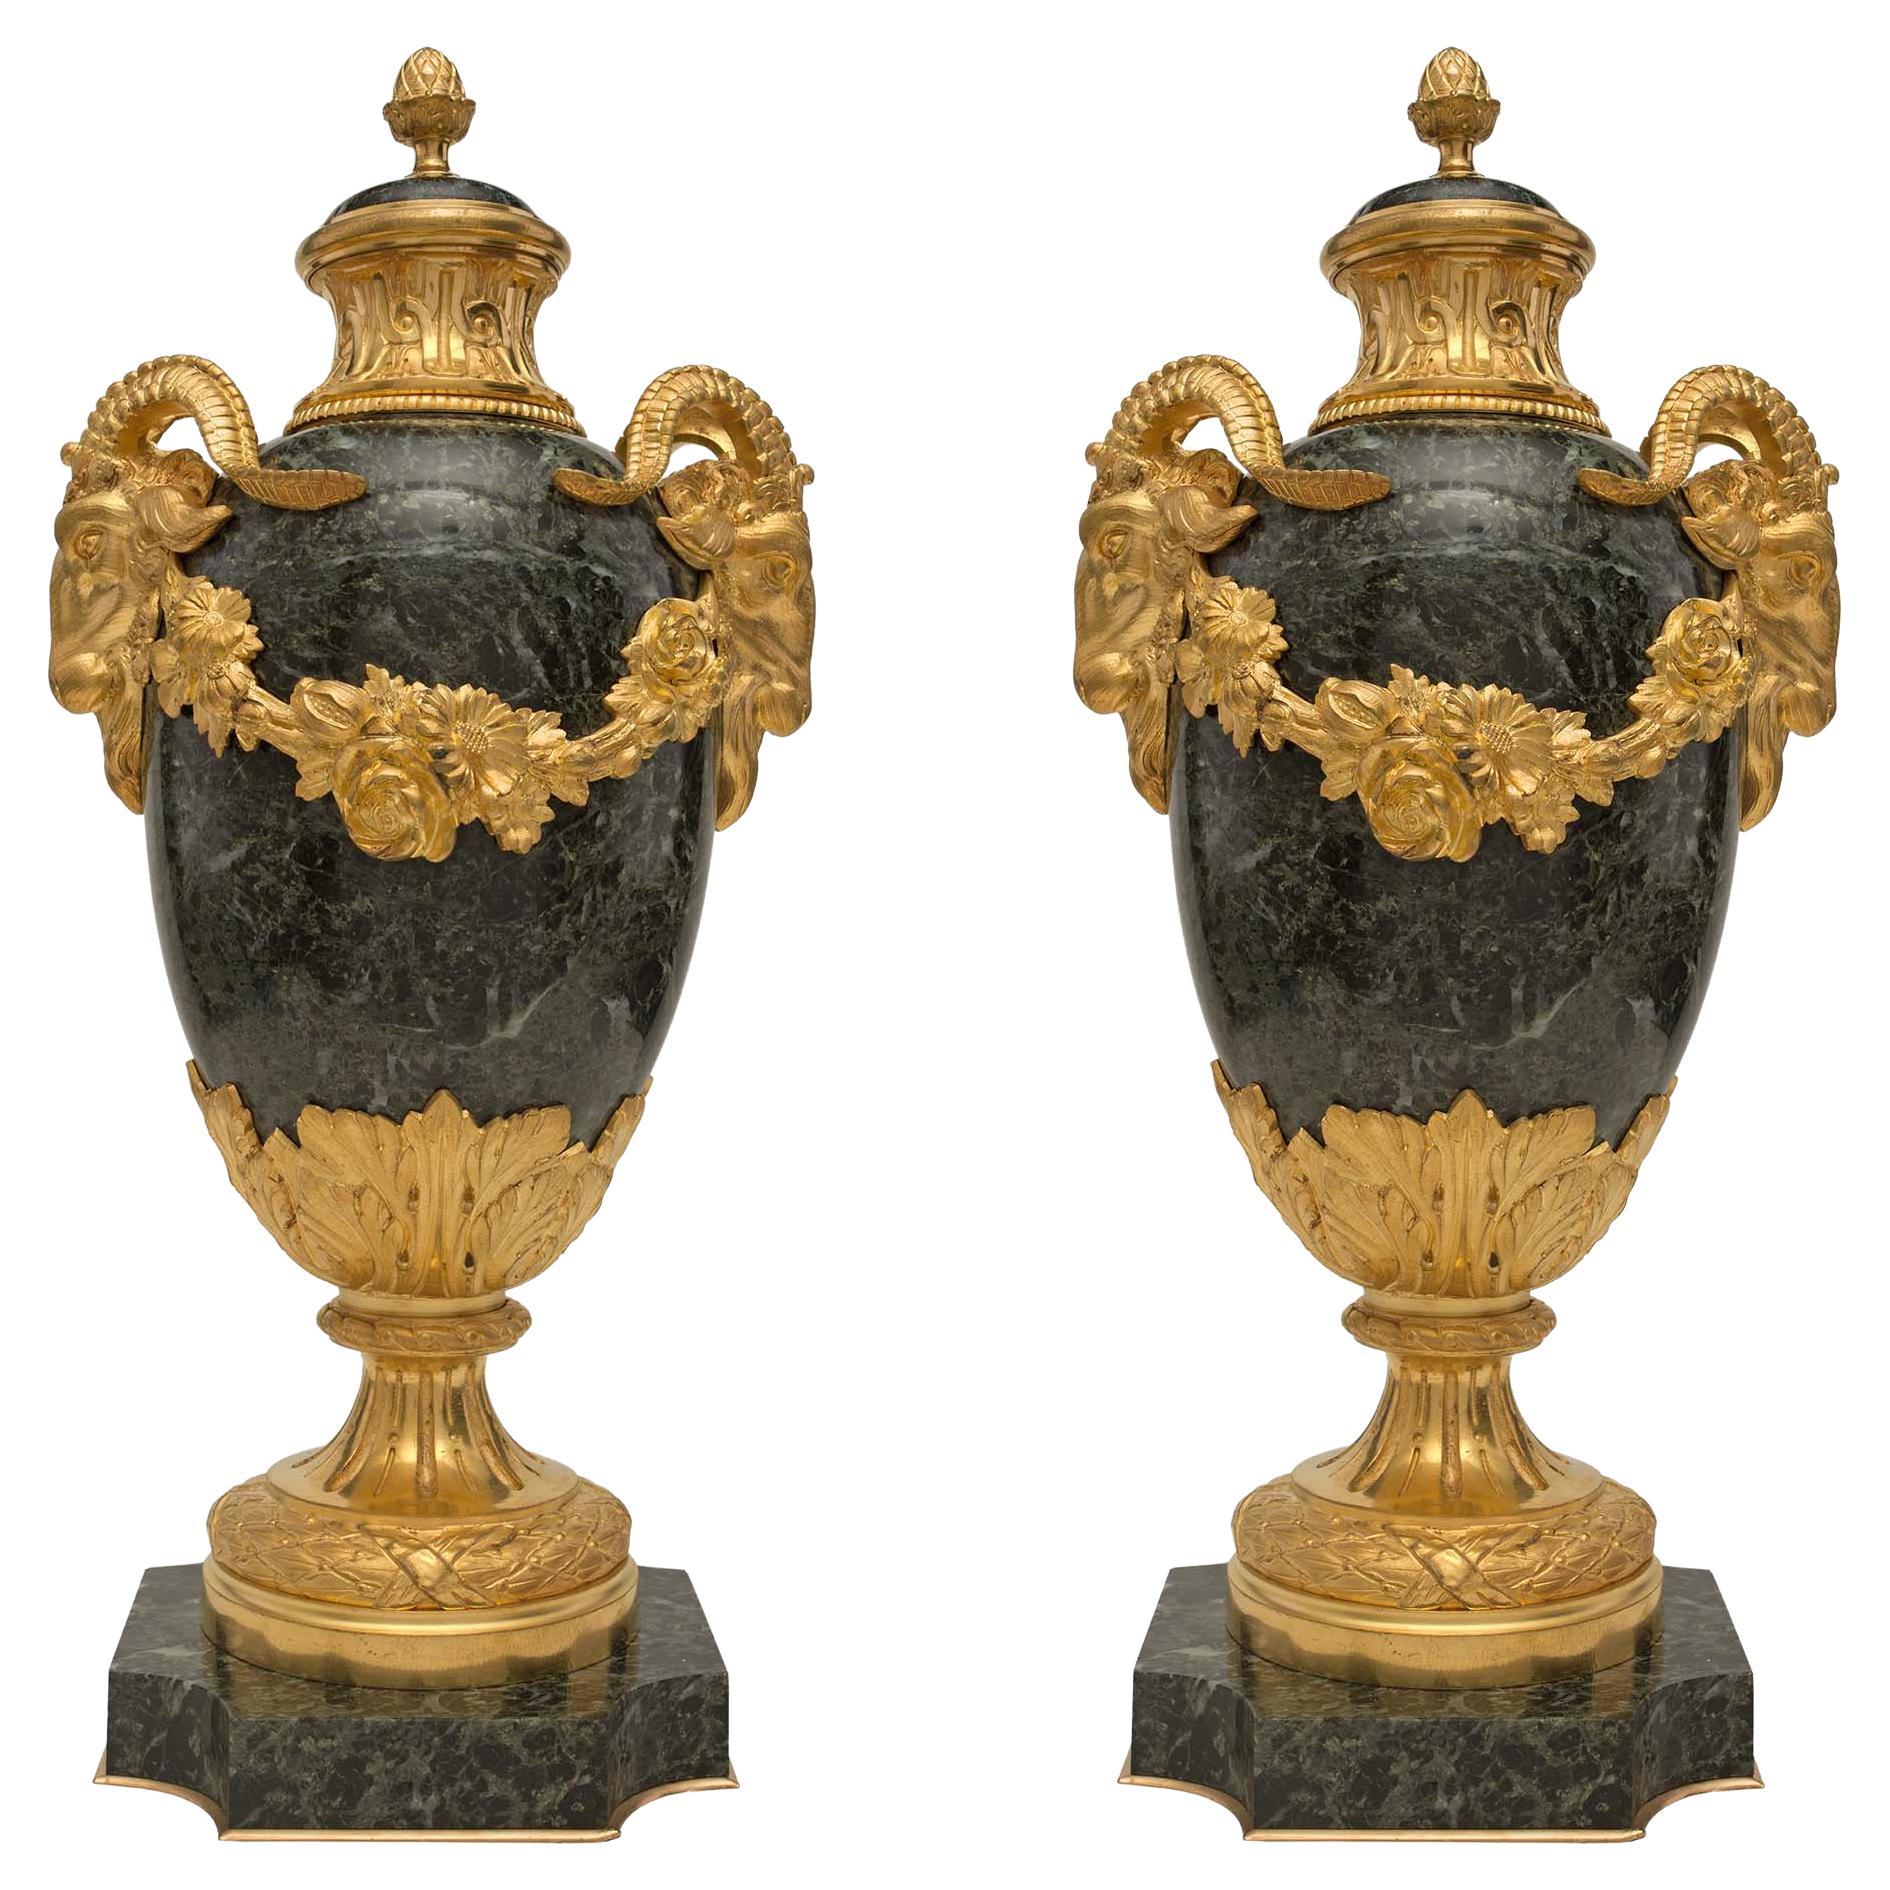 Pair of French 19th Century Louis XVI Style Vert Antique Lidded Marble Urns